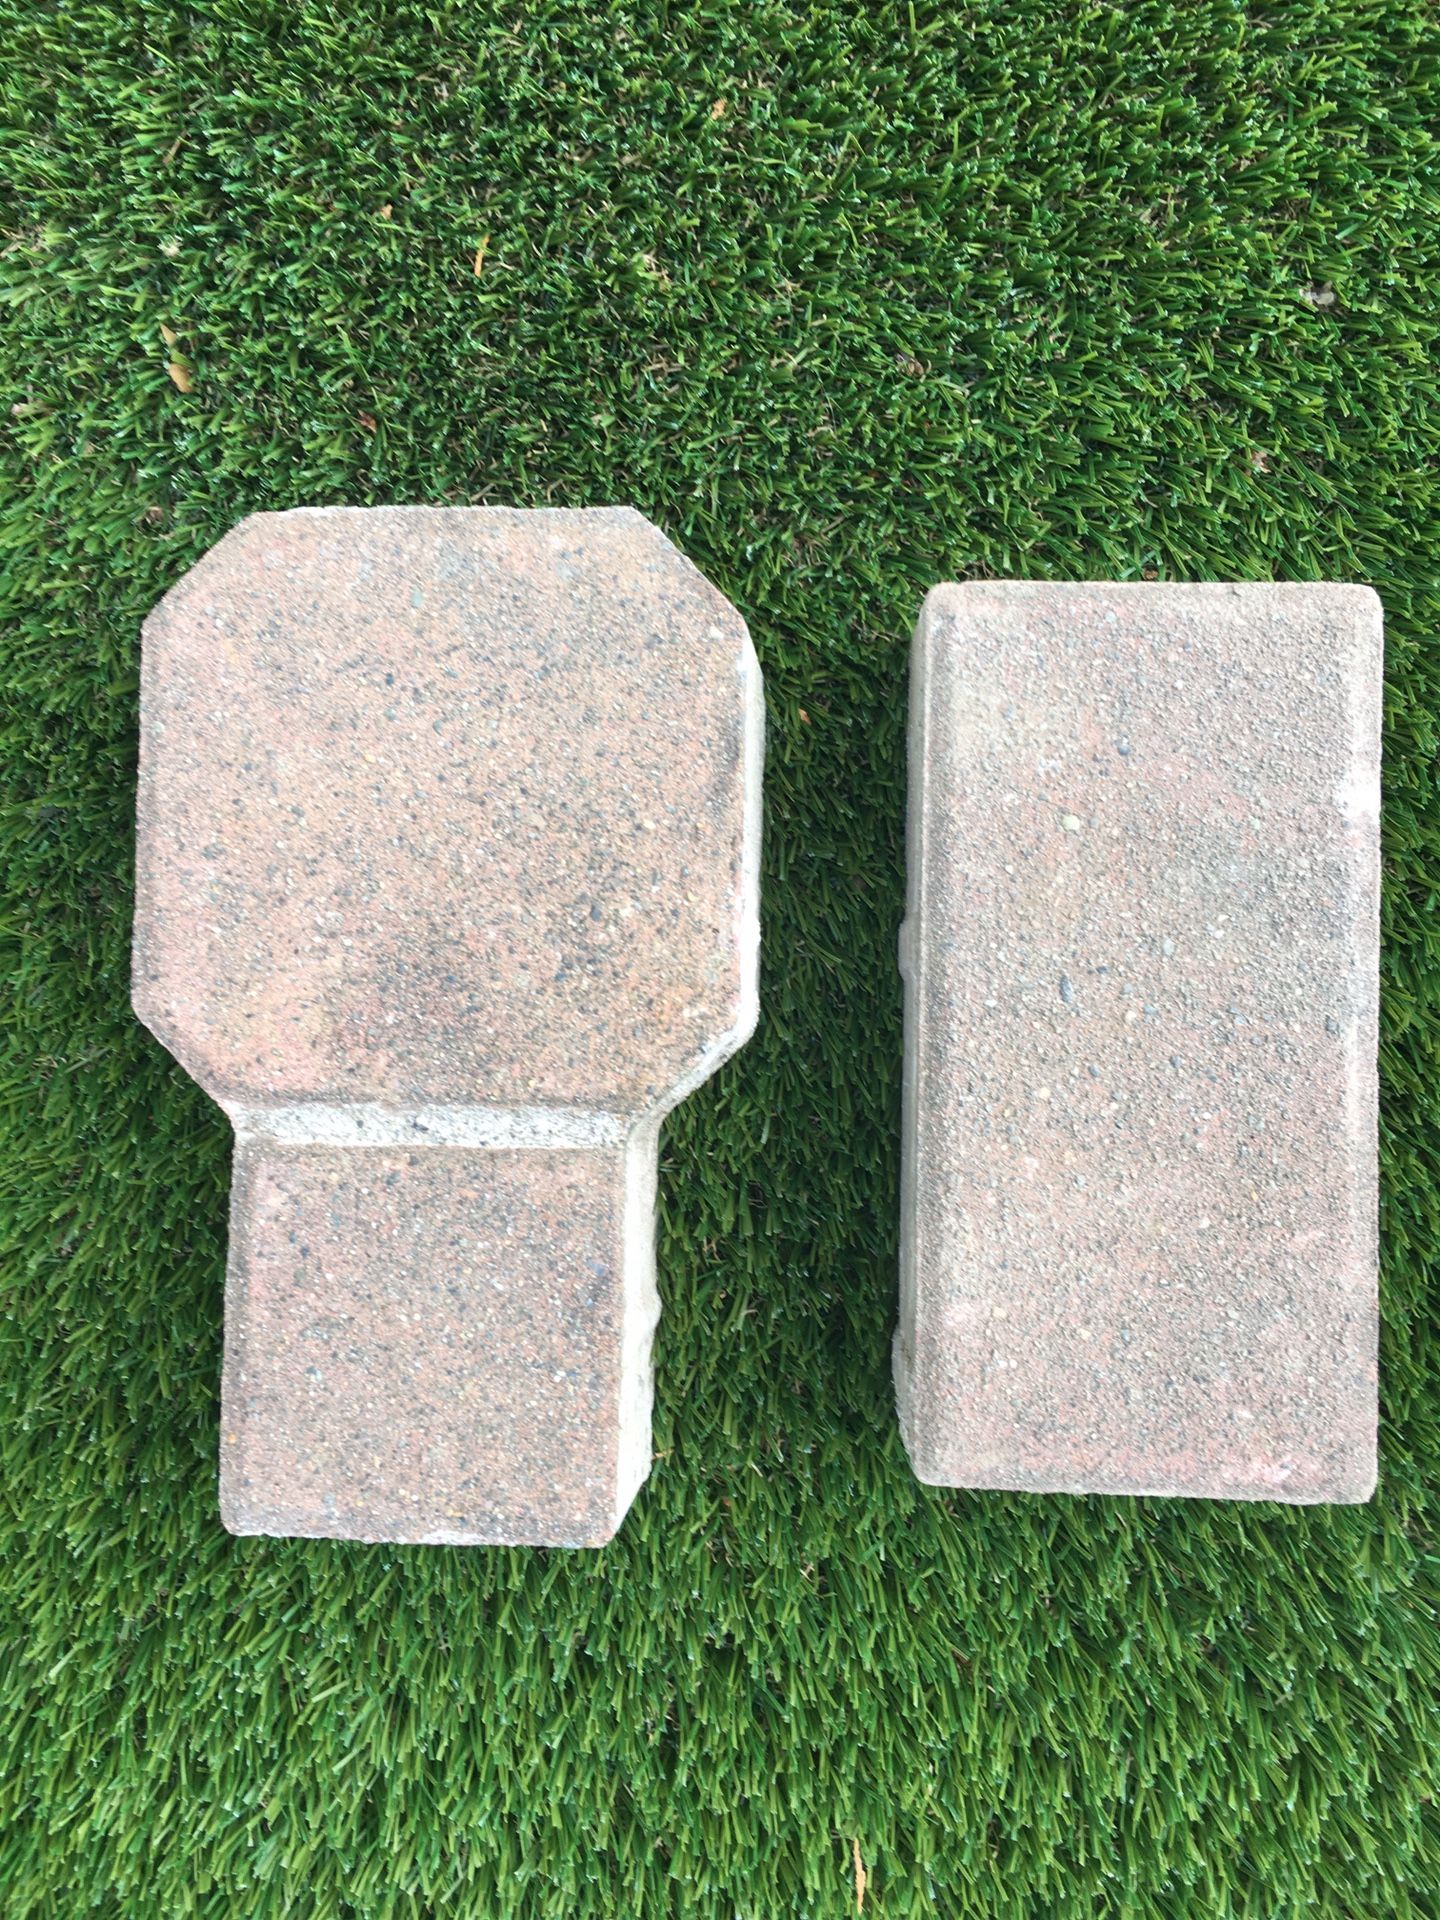 Concrete tan pavers. 175 octagon. 80 rectangle. Priced at Home Depot $1.55 ea. octagon and $.58 rectangle.